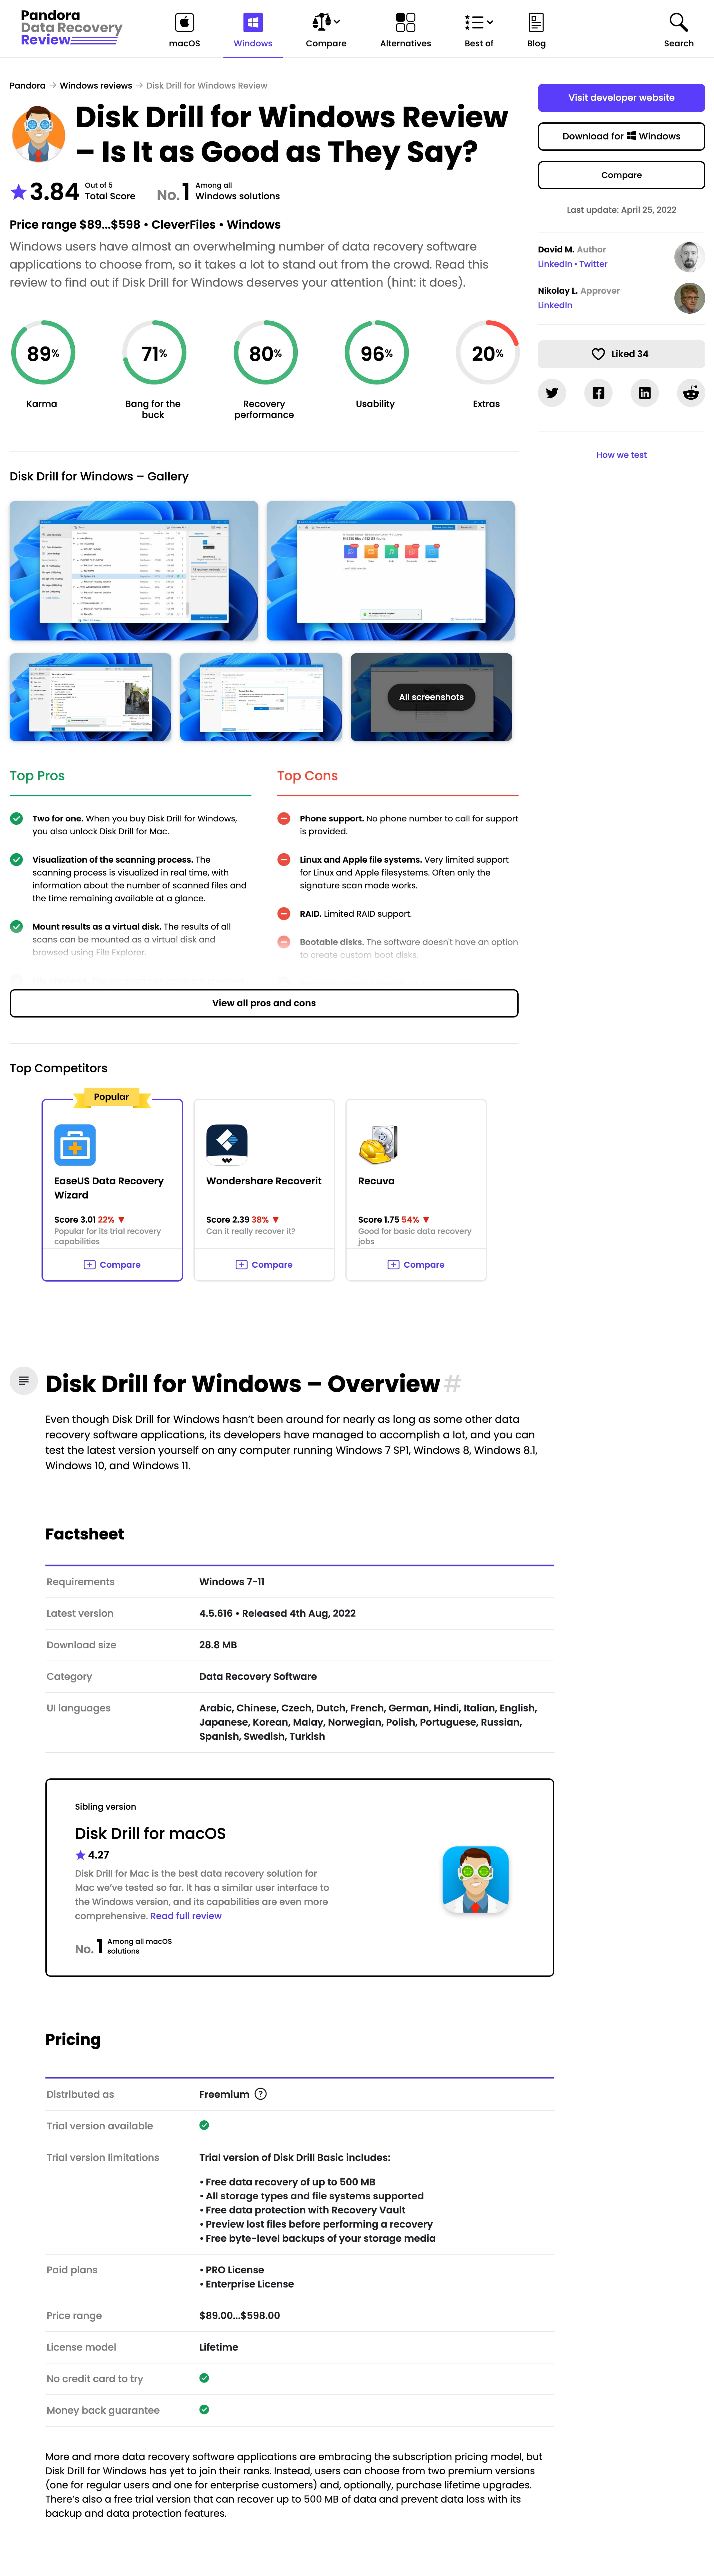 Disk Drill for Windows Review – Is It as Good as They Say?
